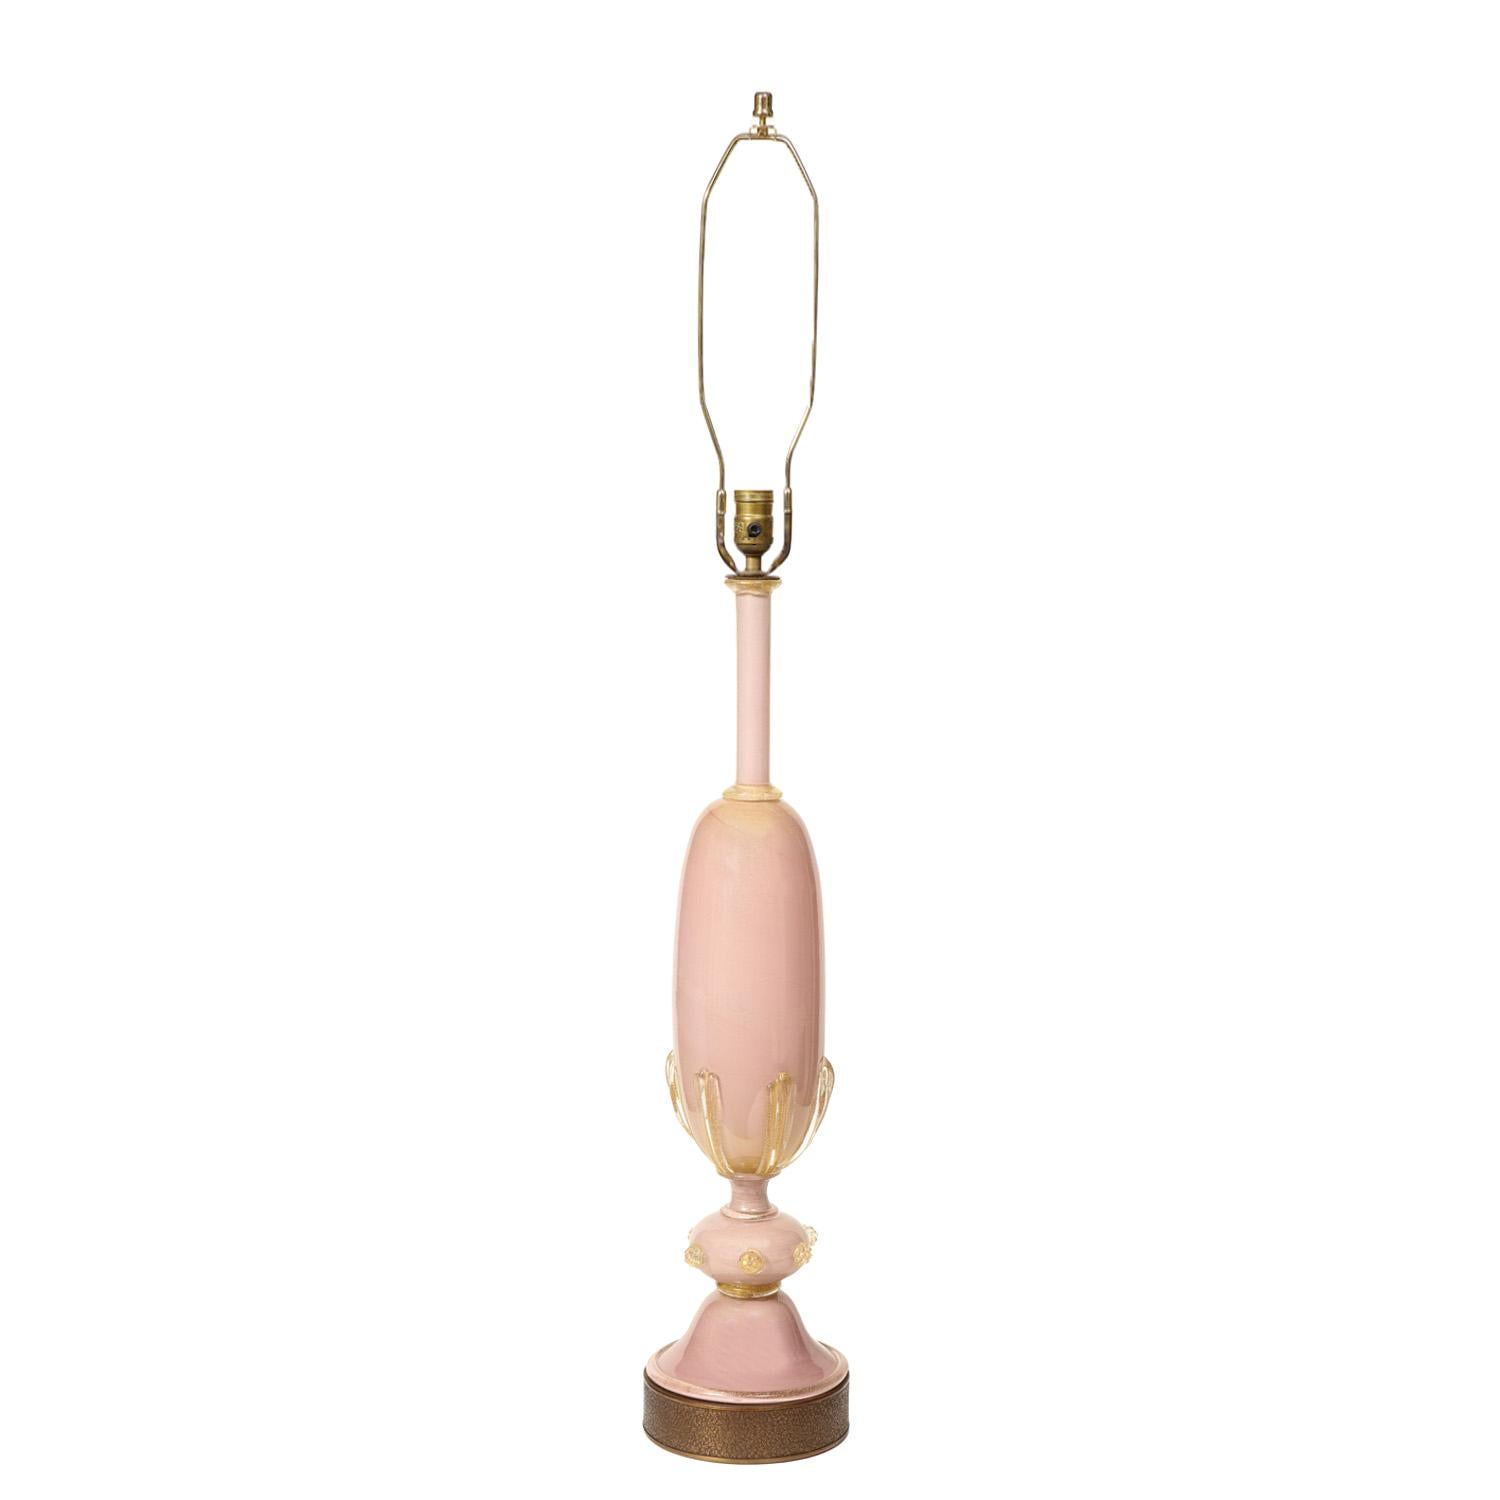 Hand blown blush color Murano glass table lamp adorned with clear glass ornamentation and avventurina throughout. Burnished brass base is decorated with etched floral motif. 34